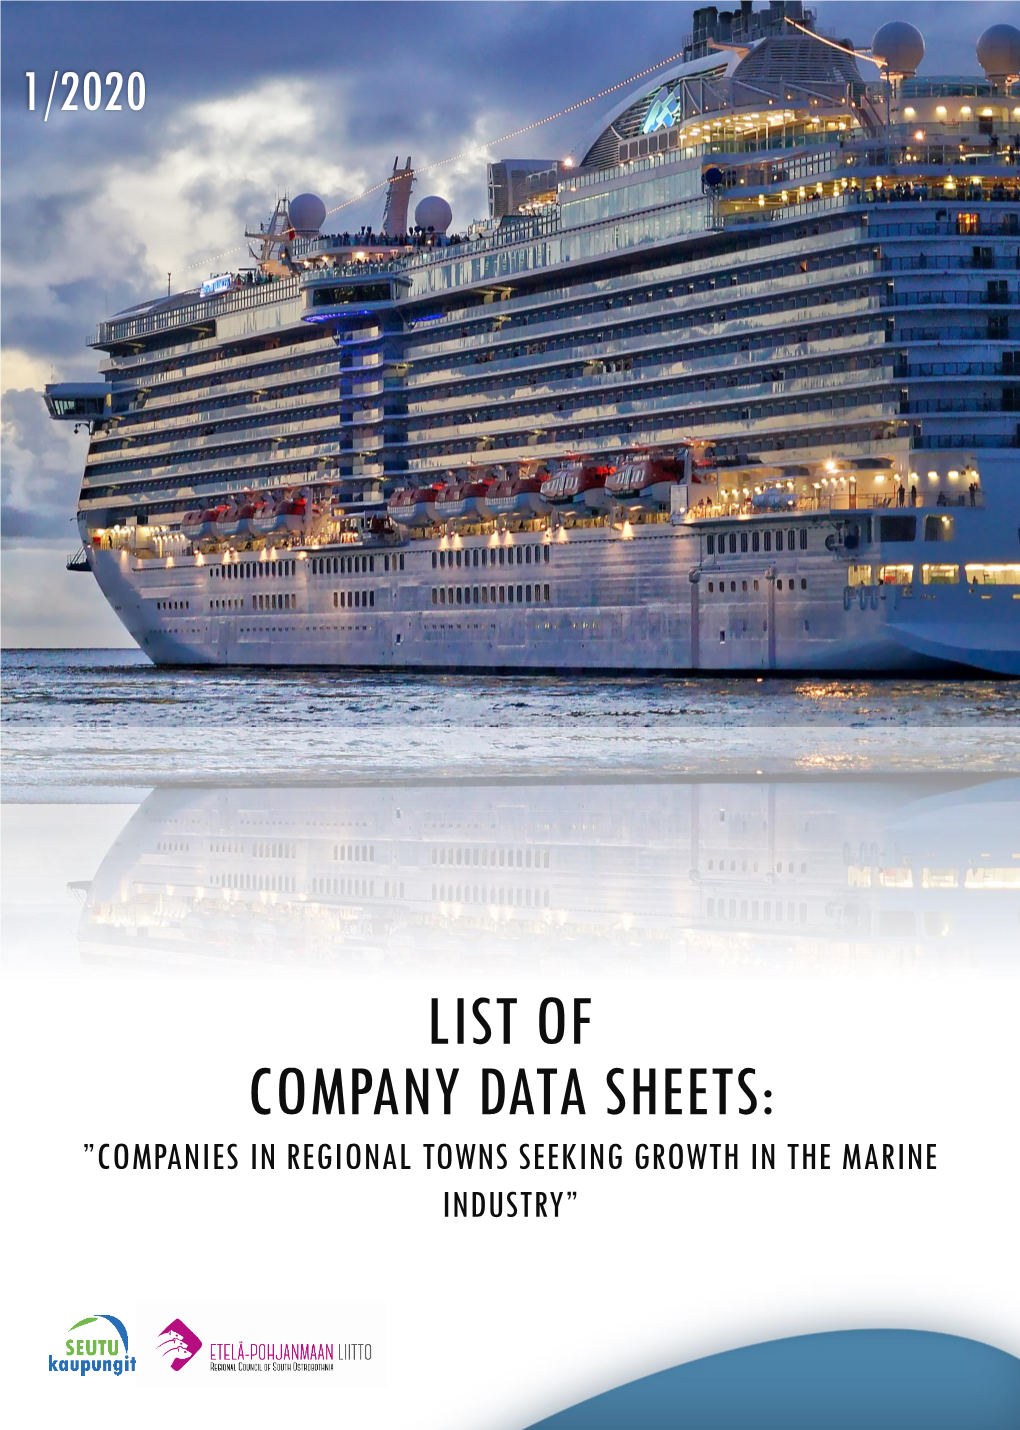 List of Company Data Sheets: ”Companies in Regional Towns Seeking Growth in the Marine Industry” Background